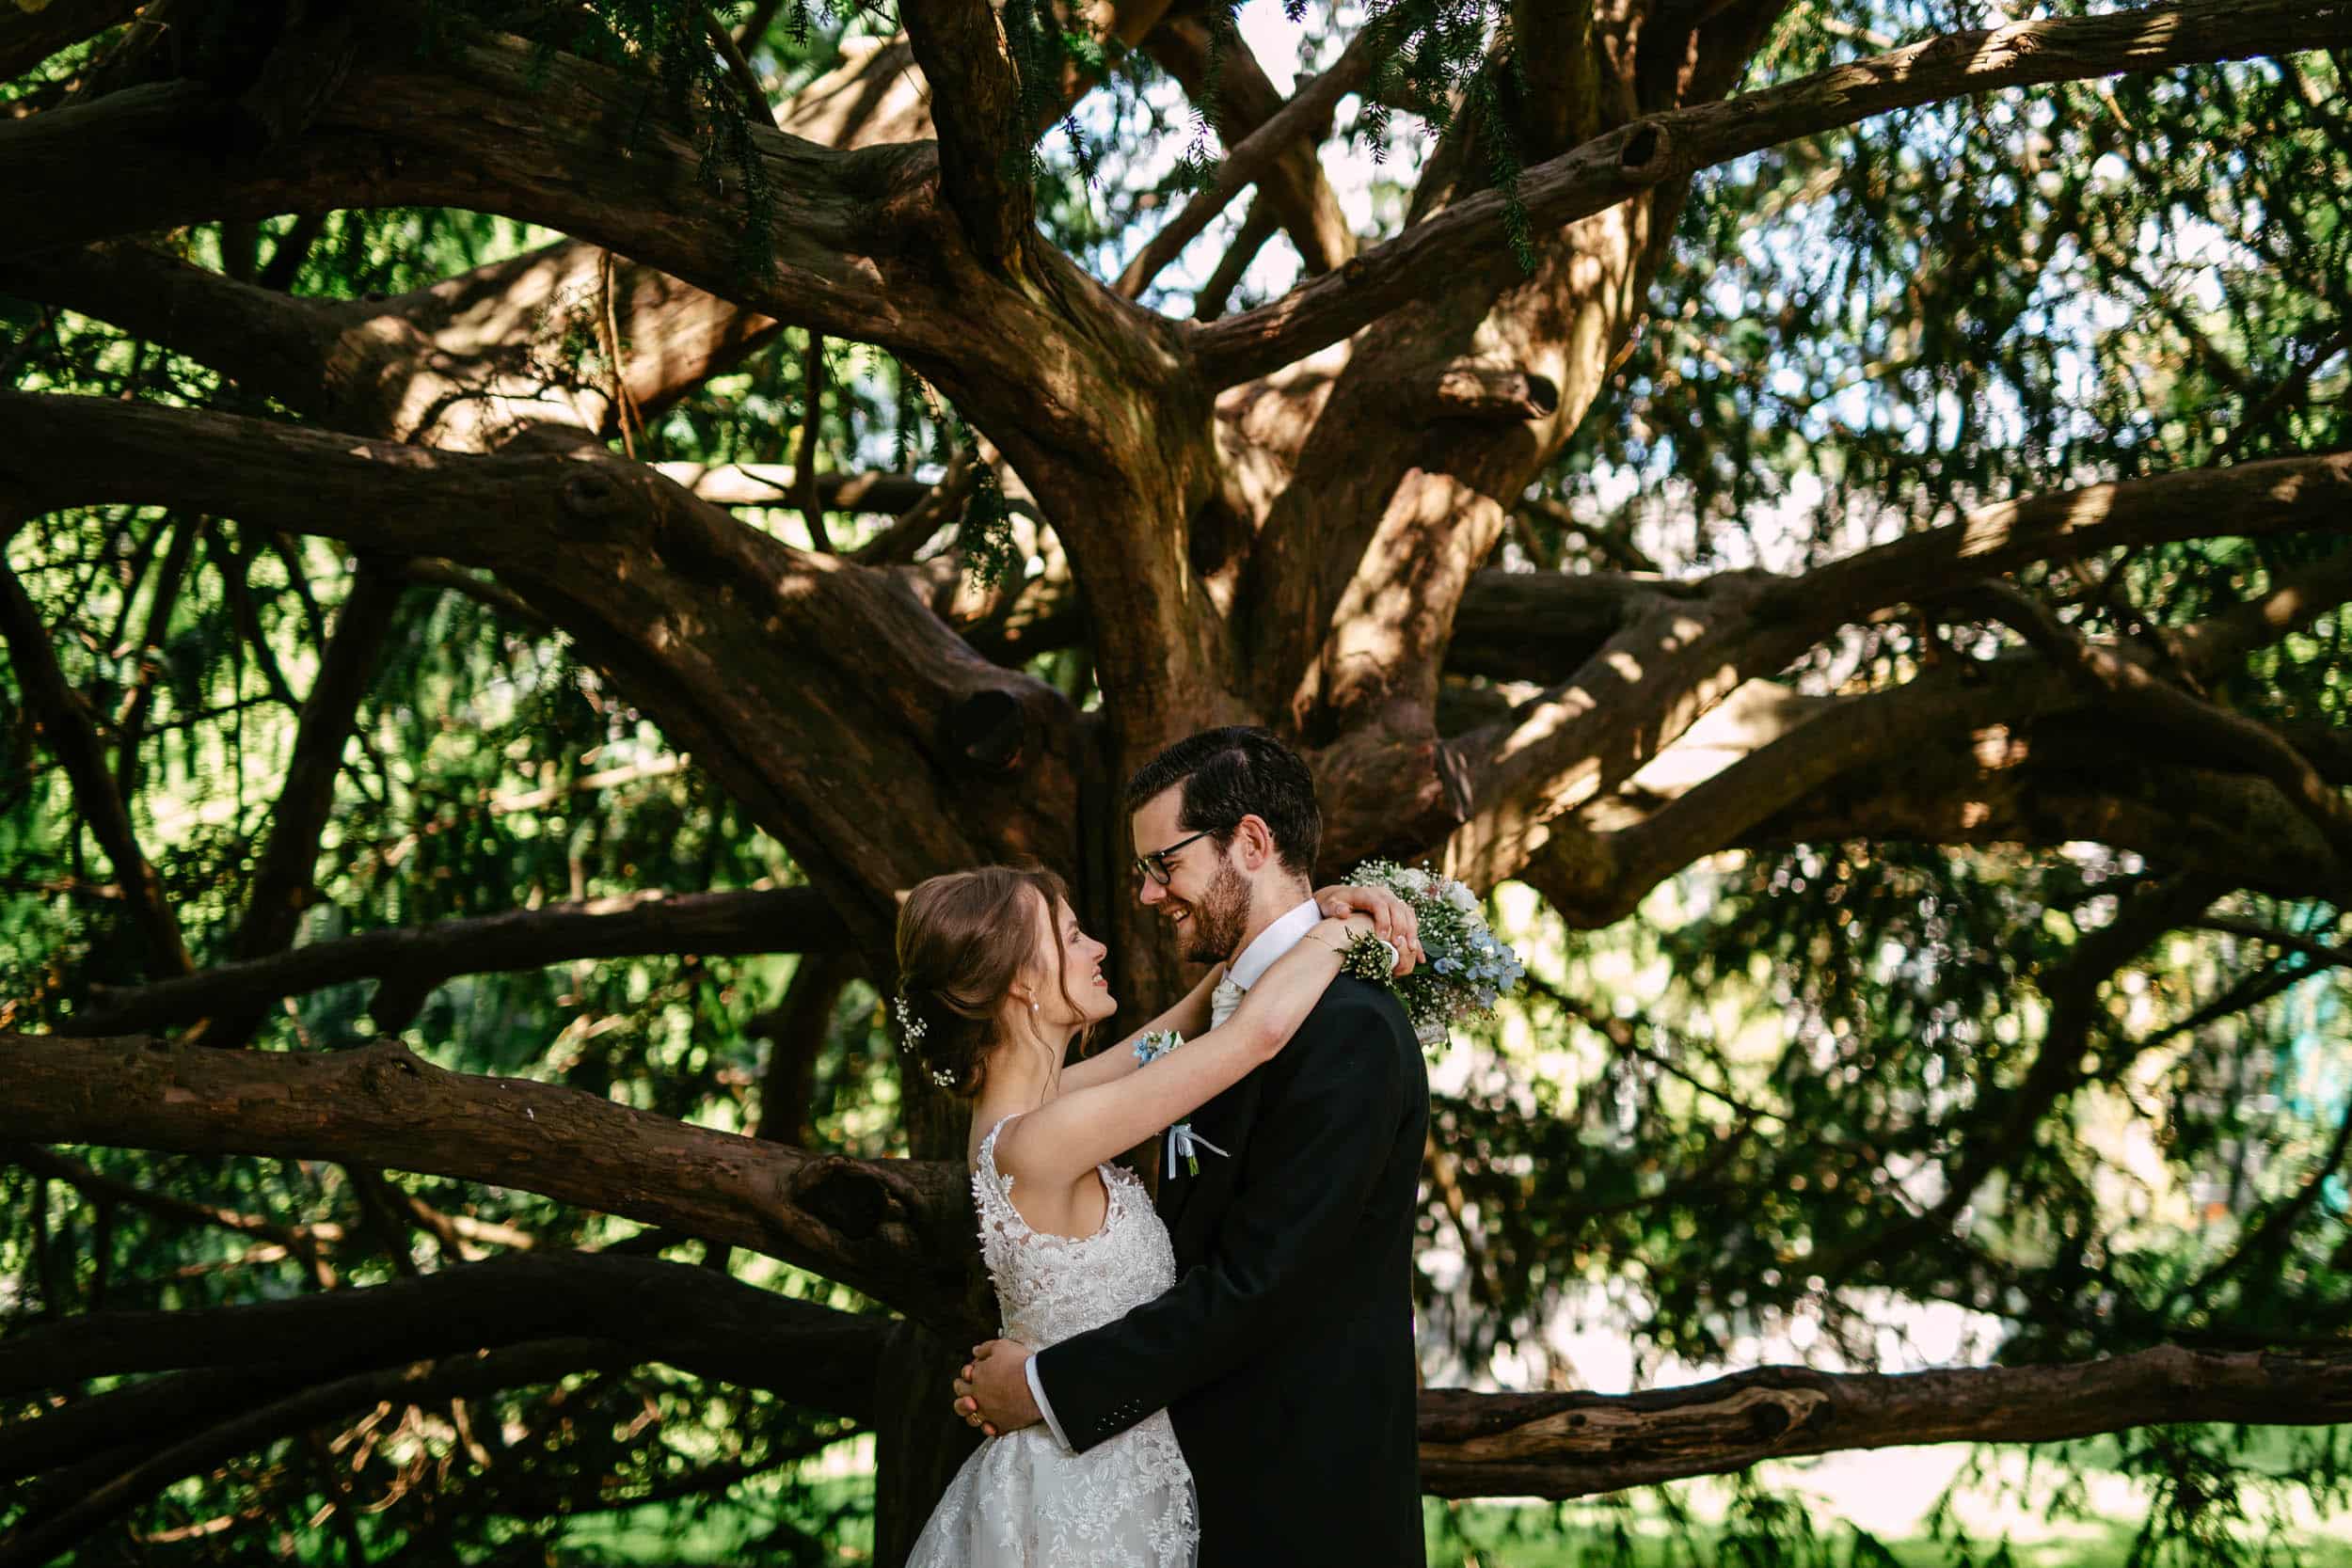 A wedding couple embrace under a large tree in the Delft botanical garden.